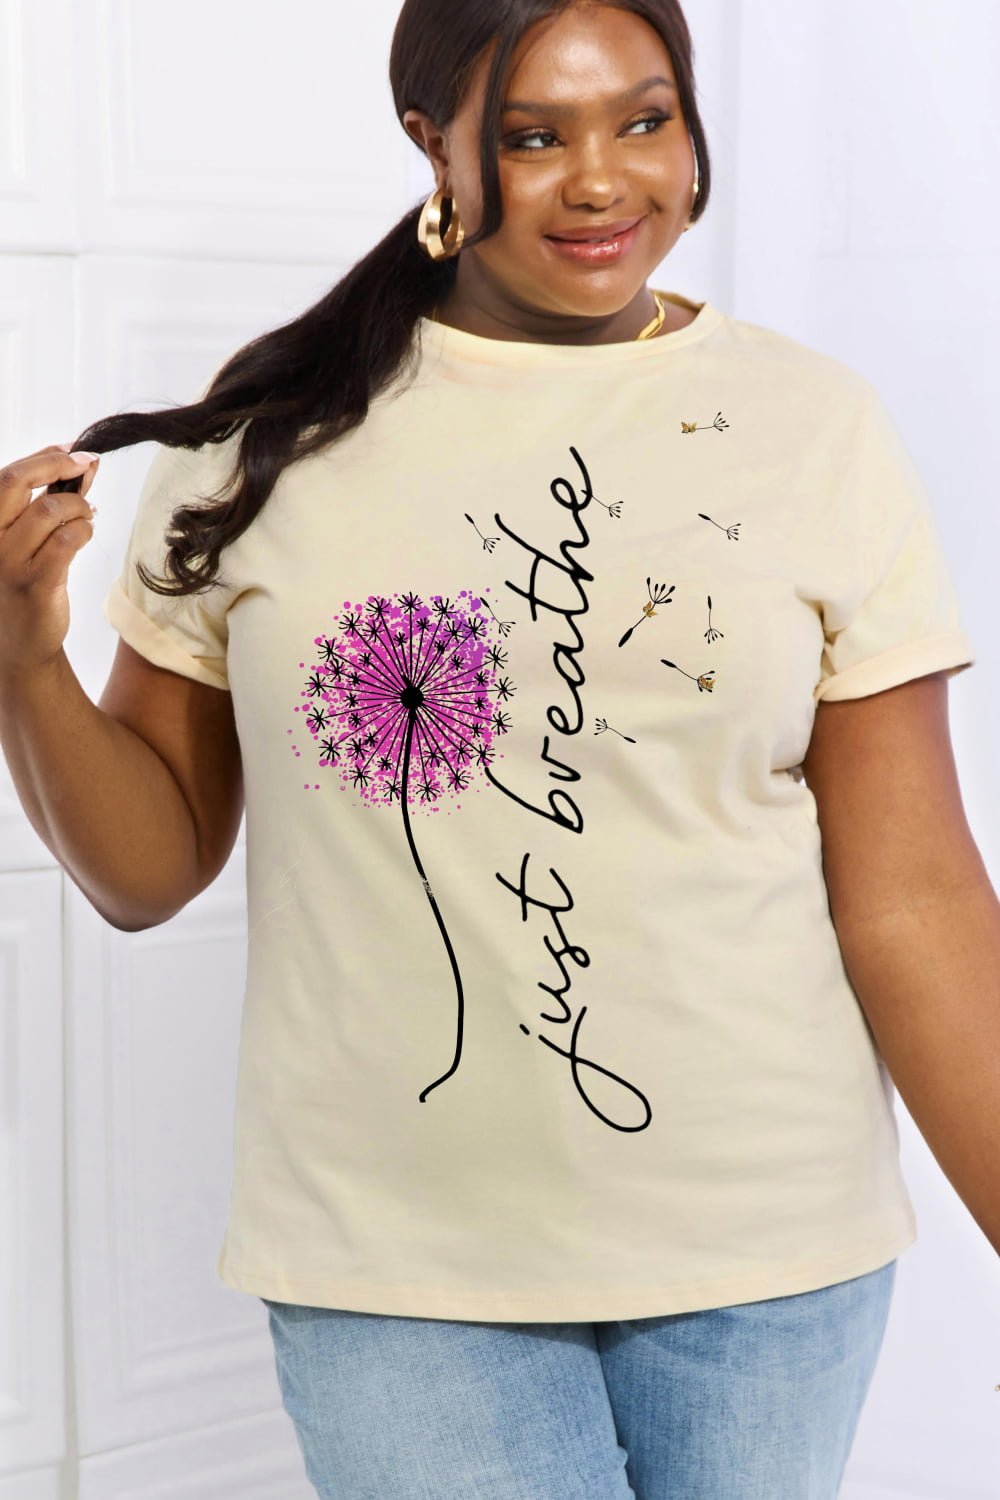 Simply Love Full Size JUST BREATHE Graphic Cotton Tee - GemThreads Boutique